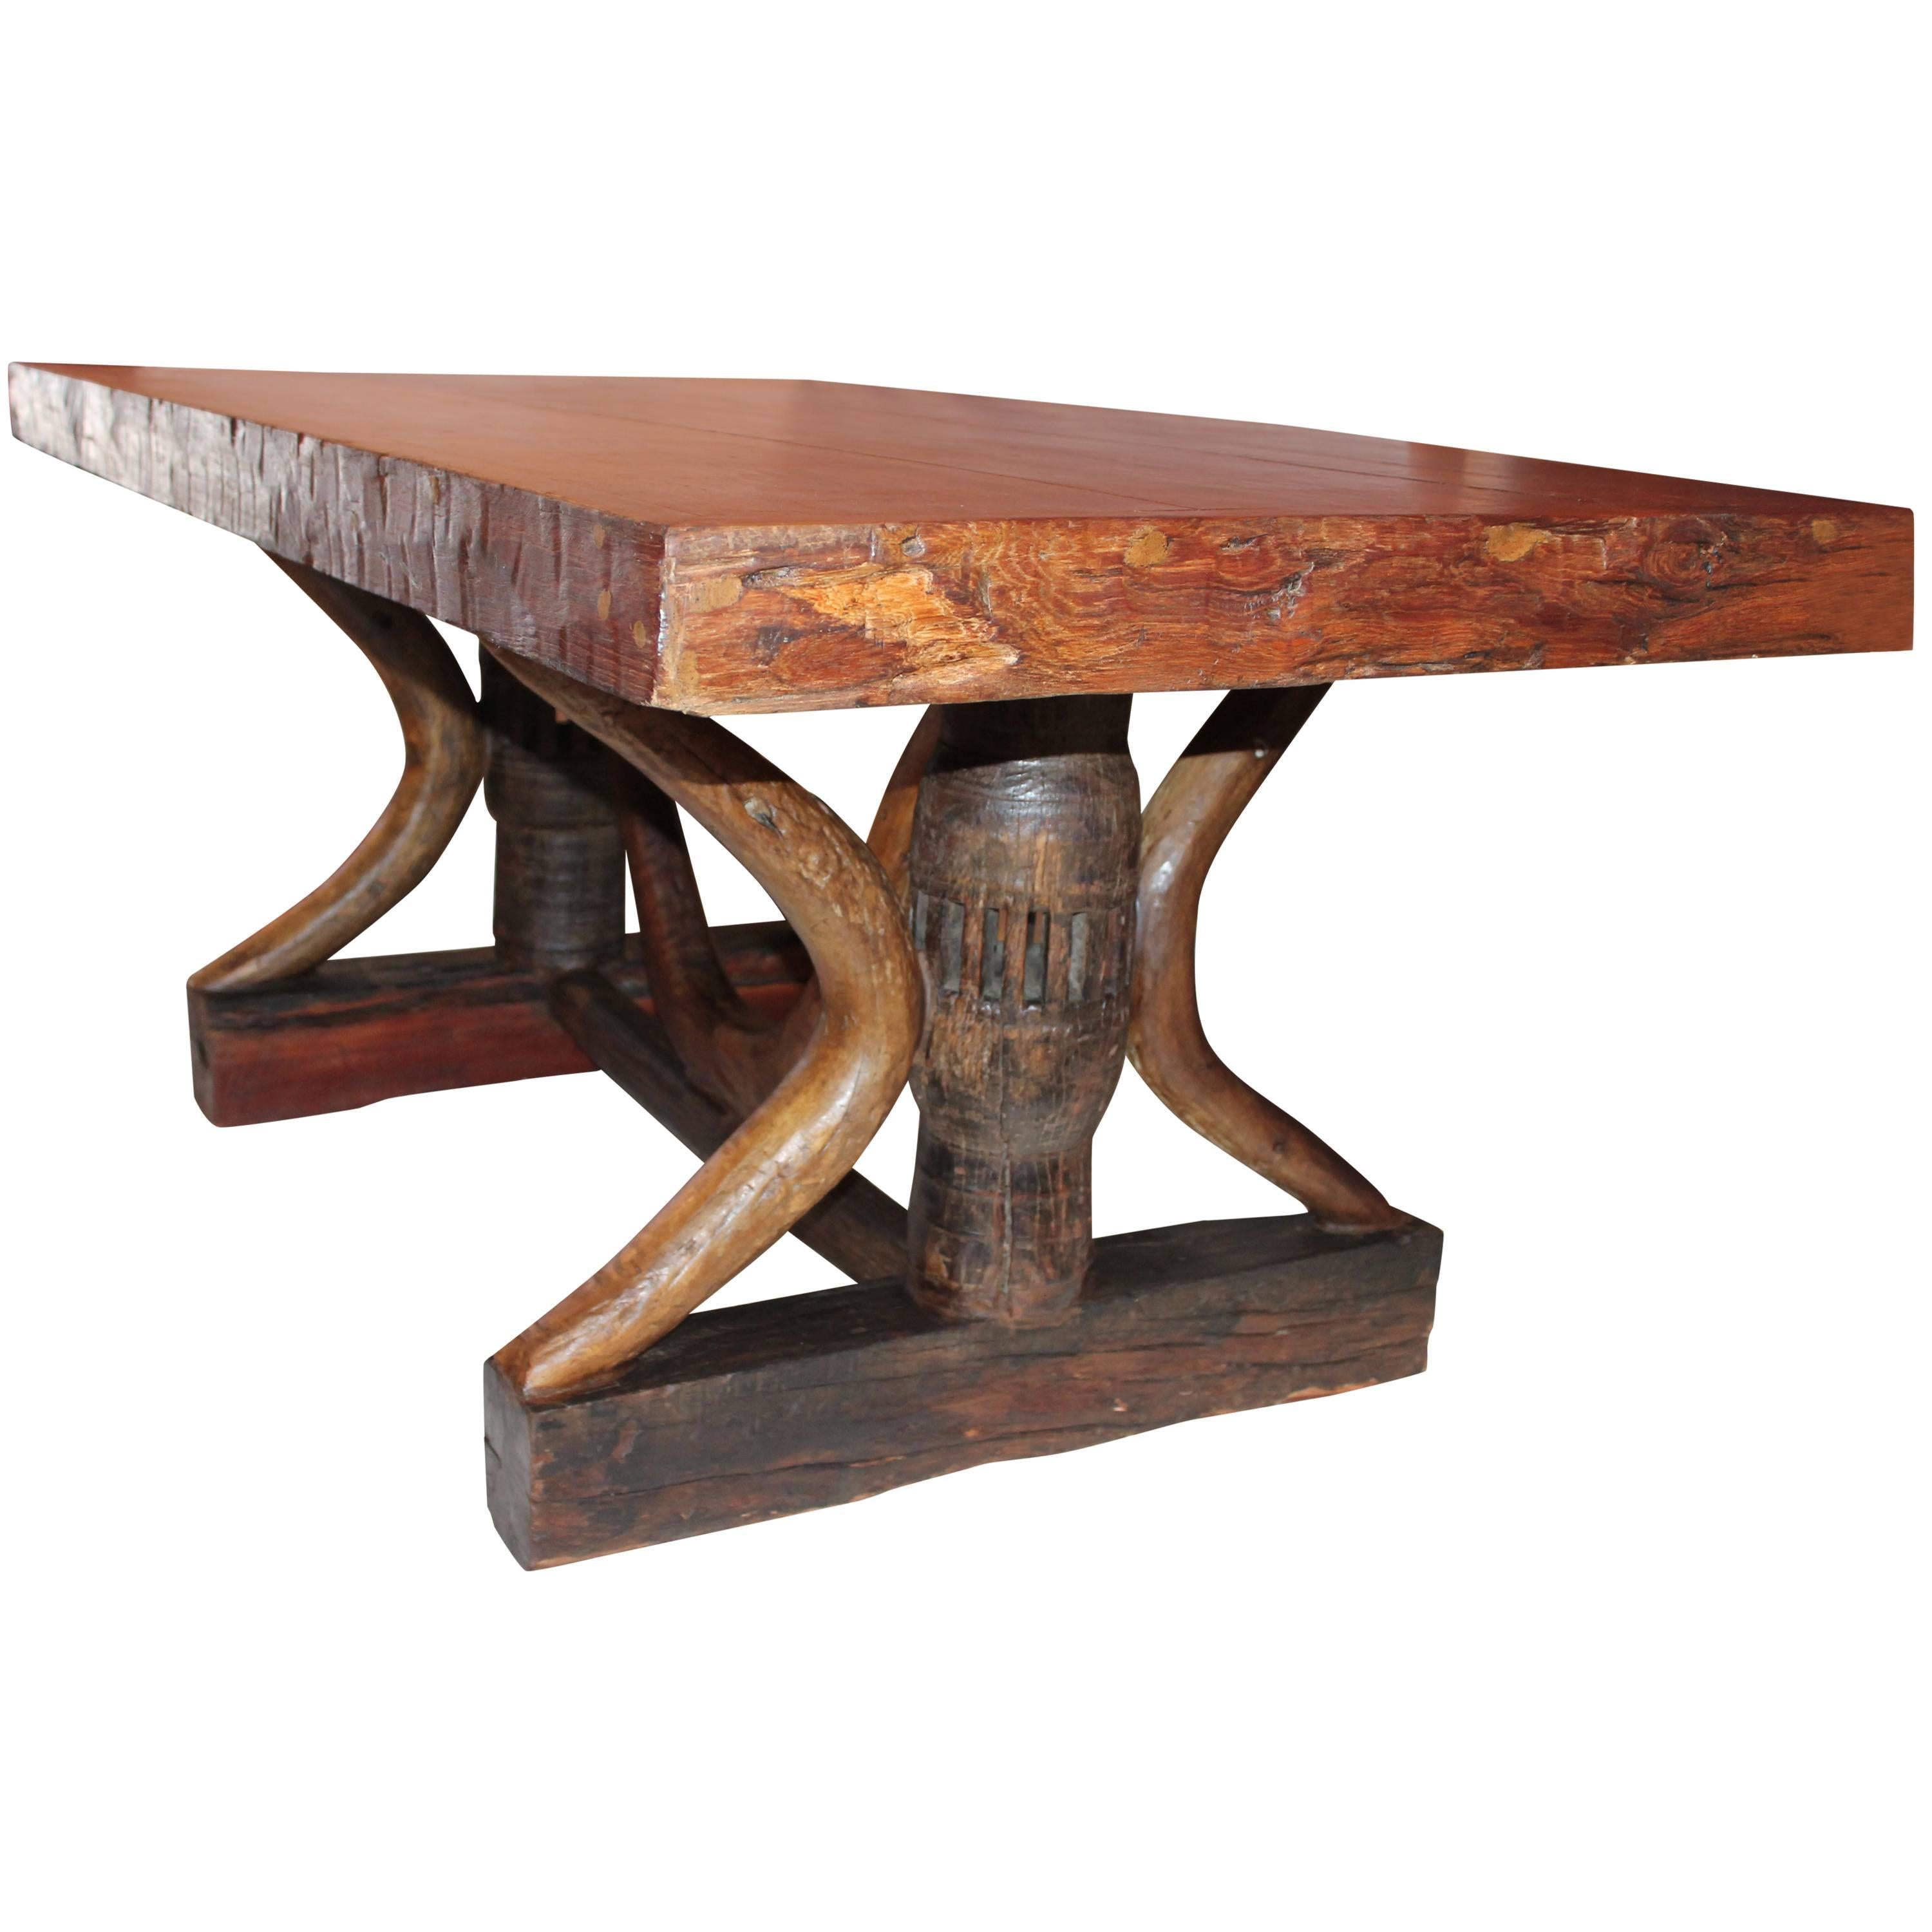 19th Century Plank Top Rustic Table